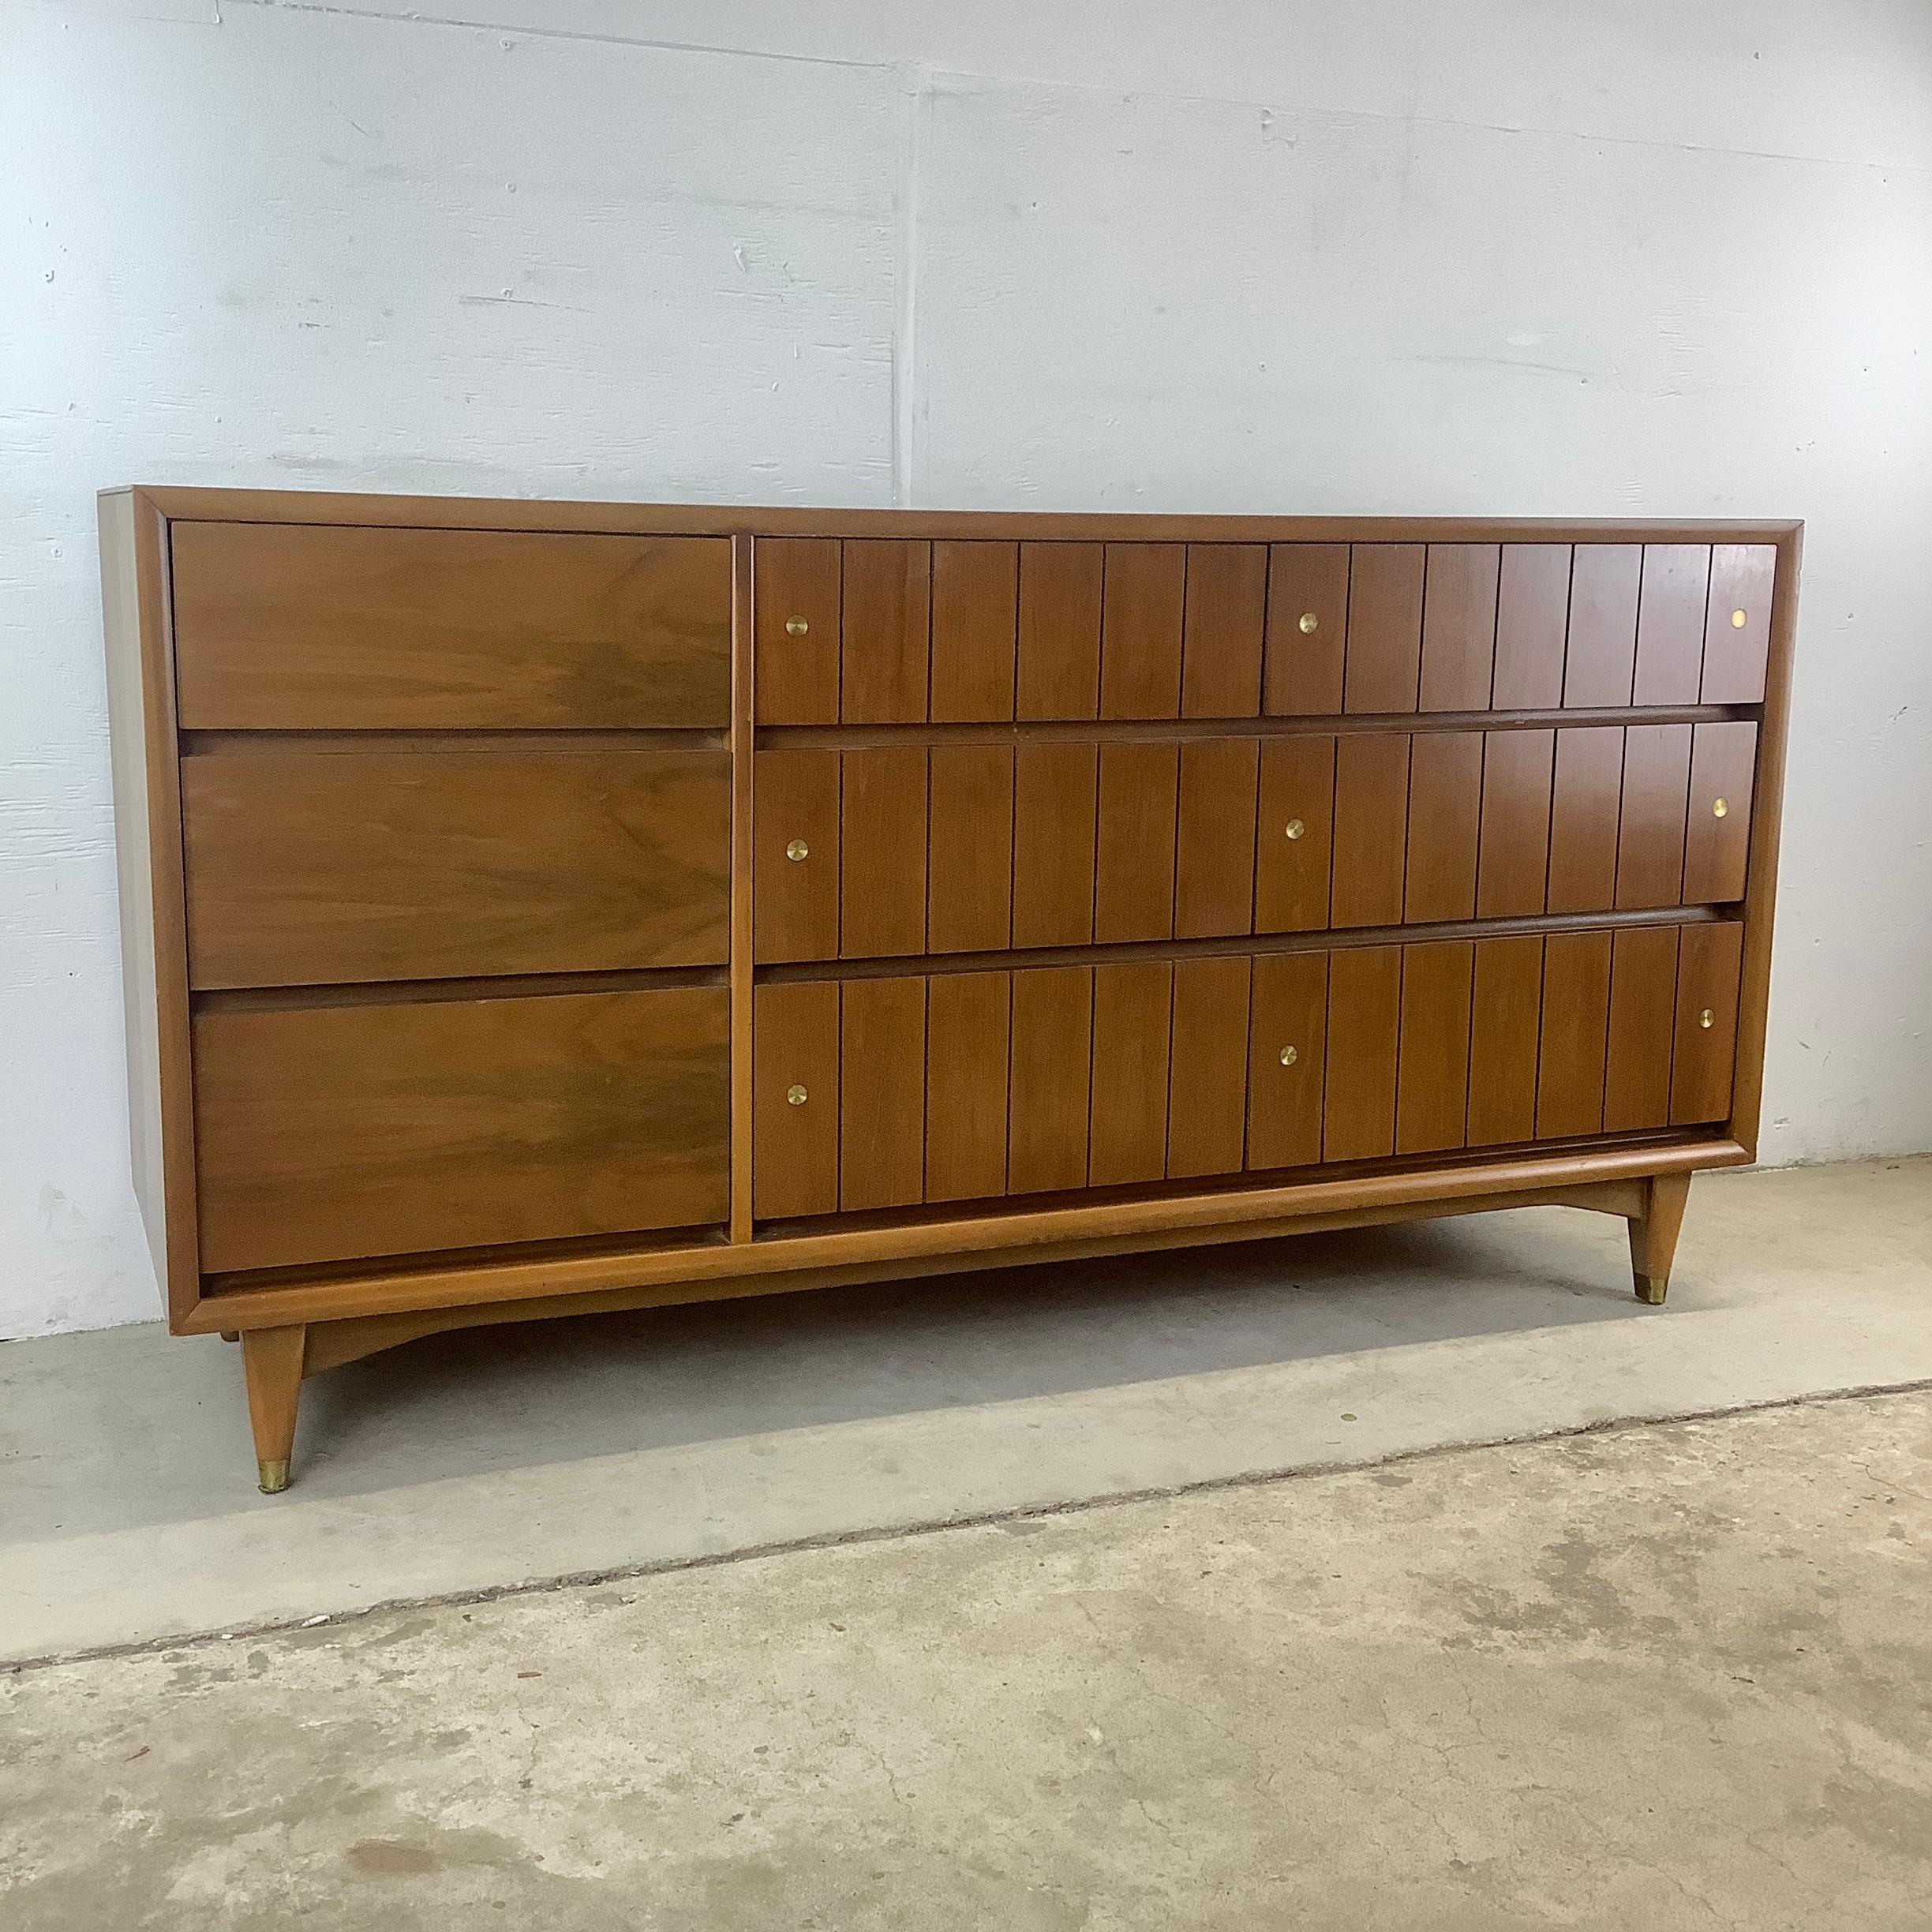 Introducing the Kroehler Mid-Century Modern Walnut Nine-Drawer Lowboy Dresser

Discover the charm of the 1960s with this Mid-Century Modern Nine-Drawer Lowboy Dresser from Kroehler Furniture. This exquisite piece embodies the quintessence of